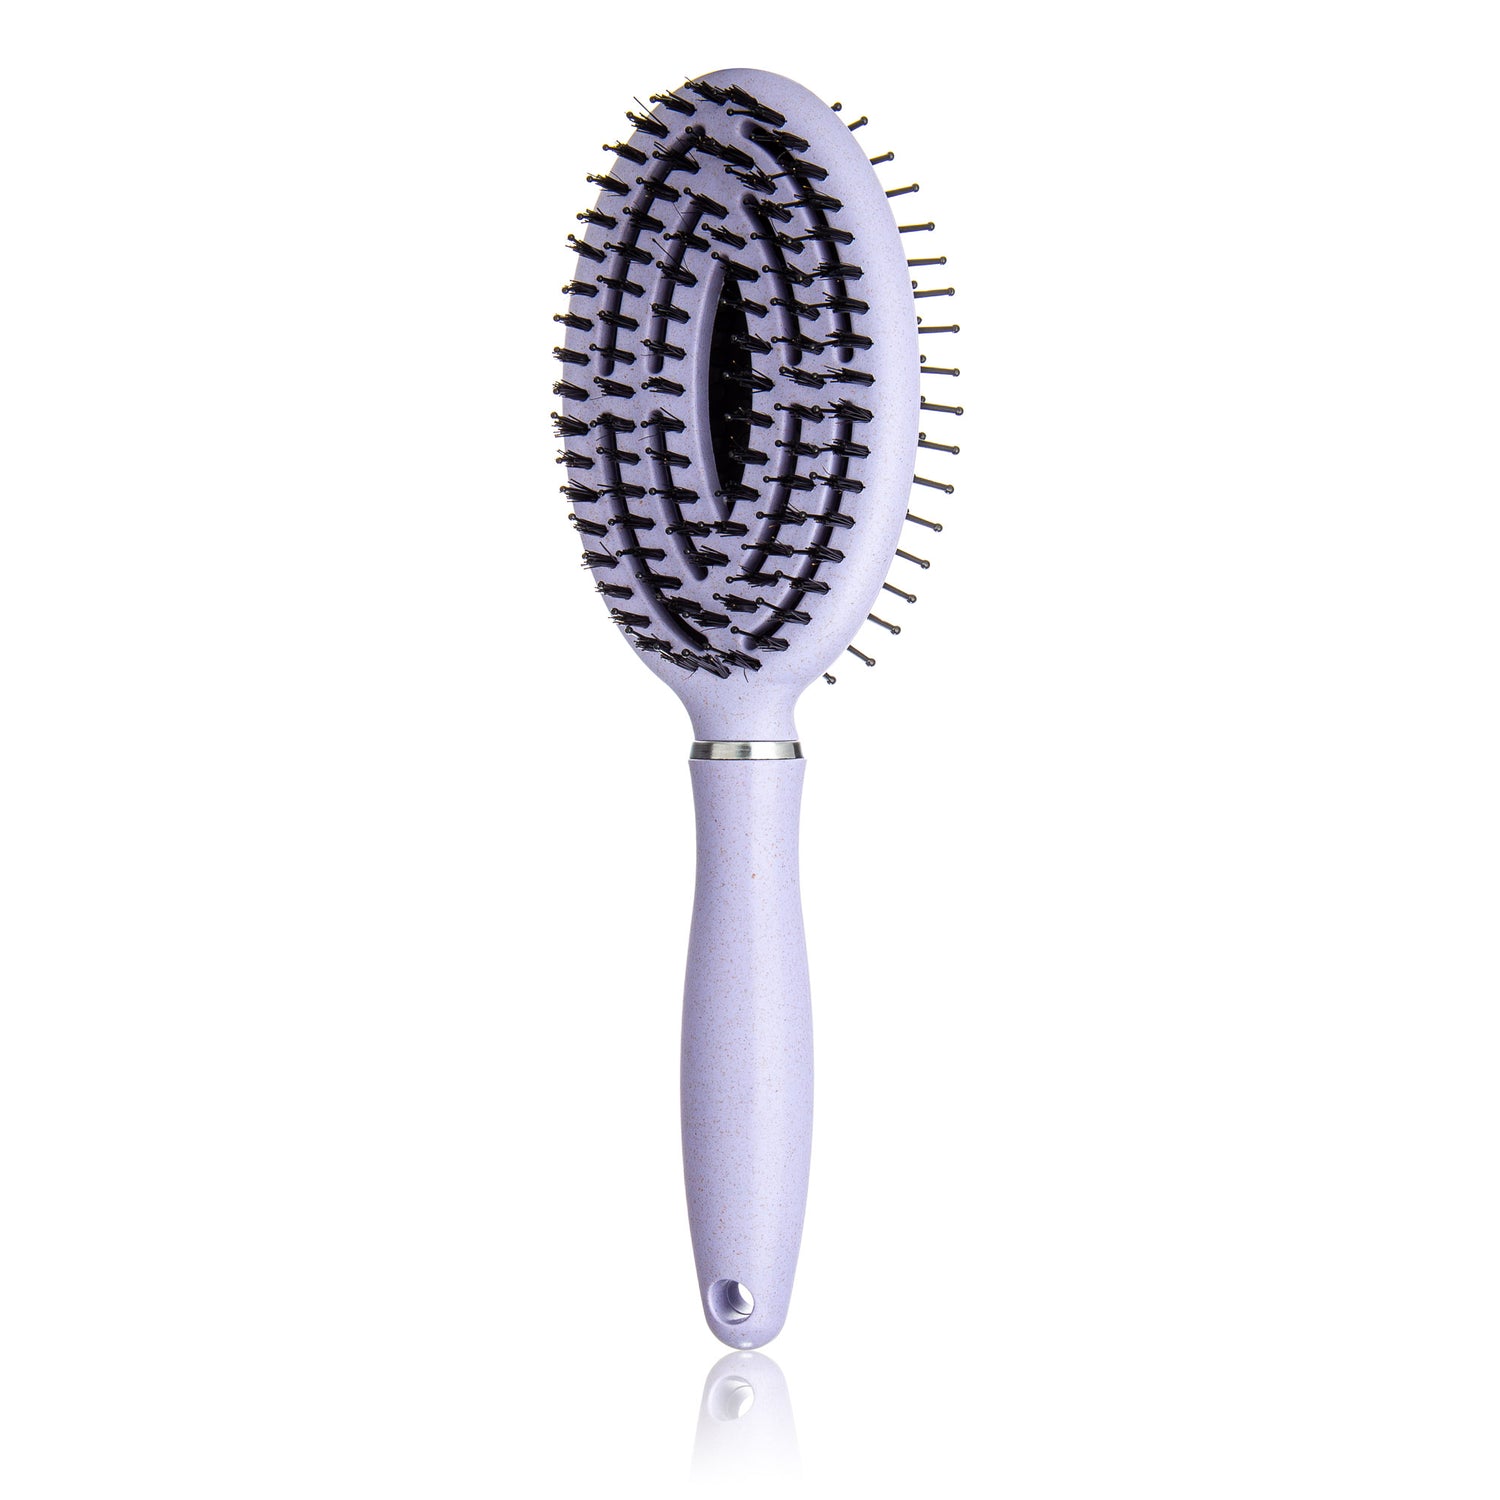 2in1 Hair Brush with Vented Spiral Design - Rice Hull (Lunar Gray)